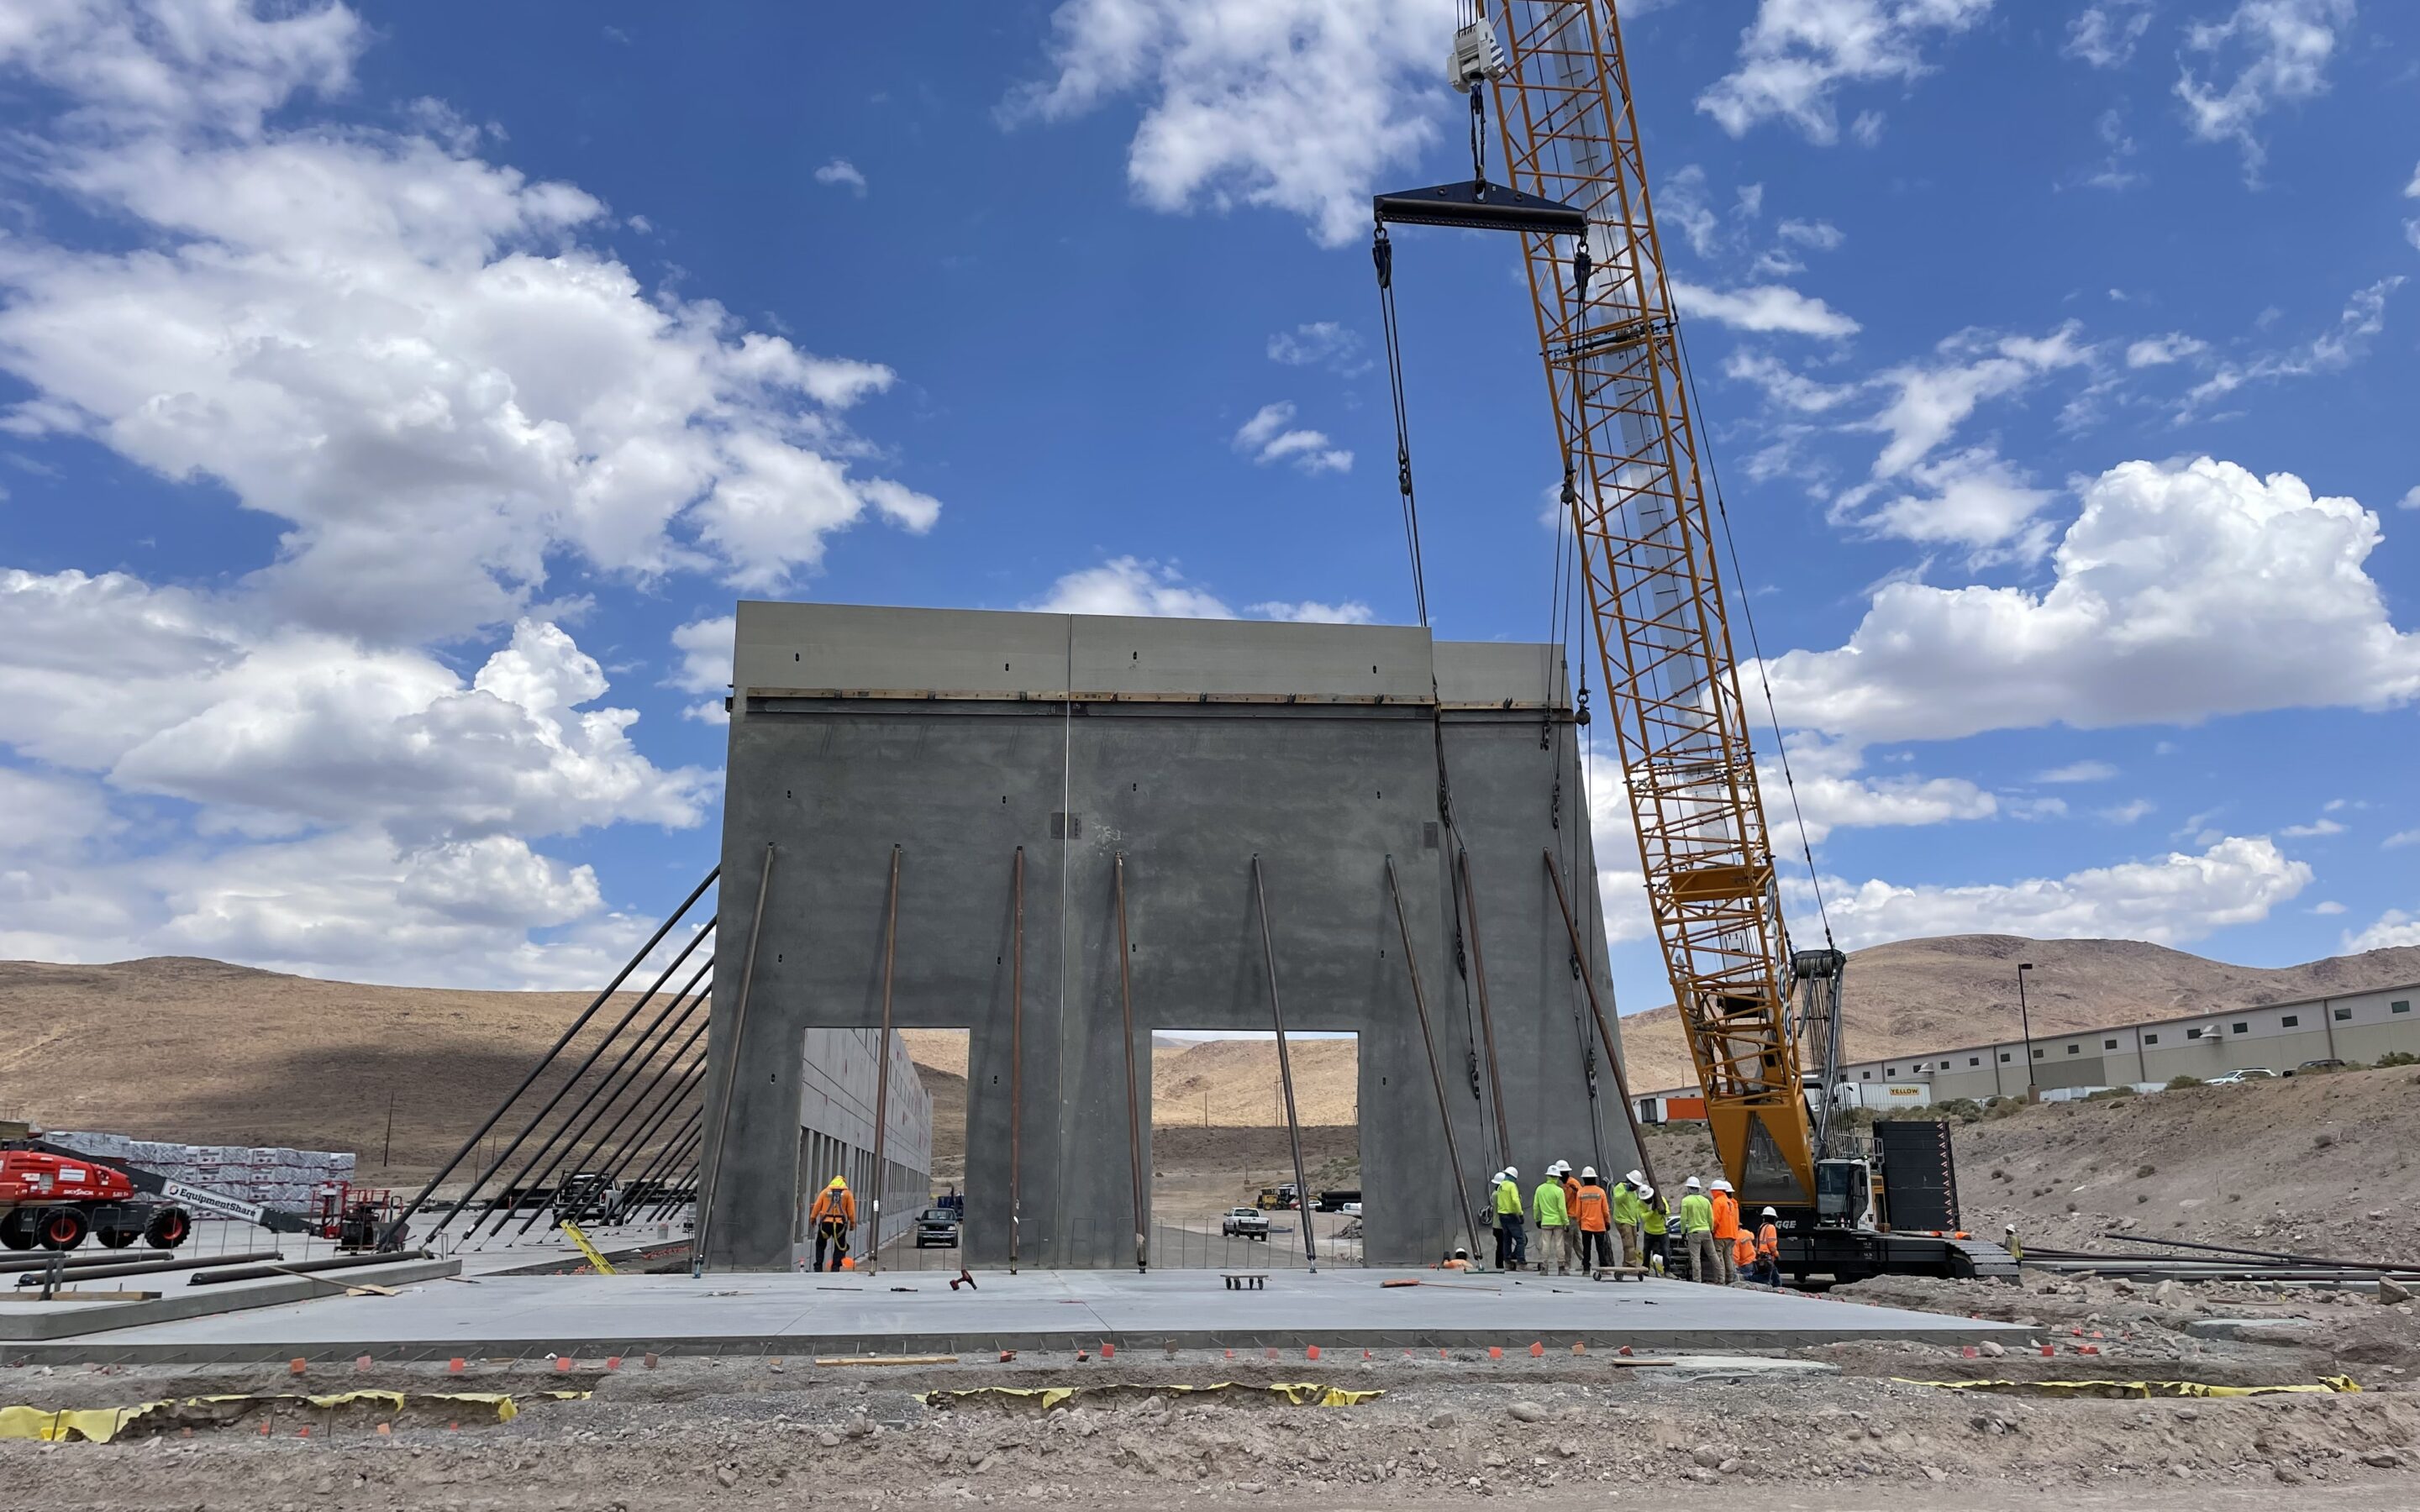 Majestic Reno Commercenter I, II, III to deliver nearly 1.5 million square feet to growing industrial market